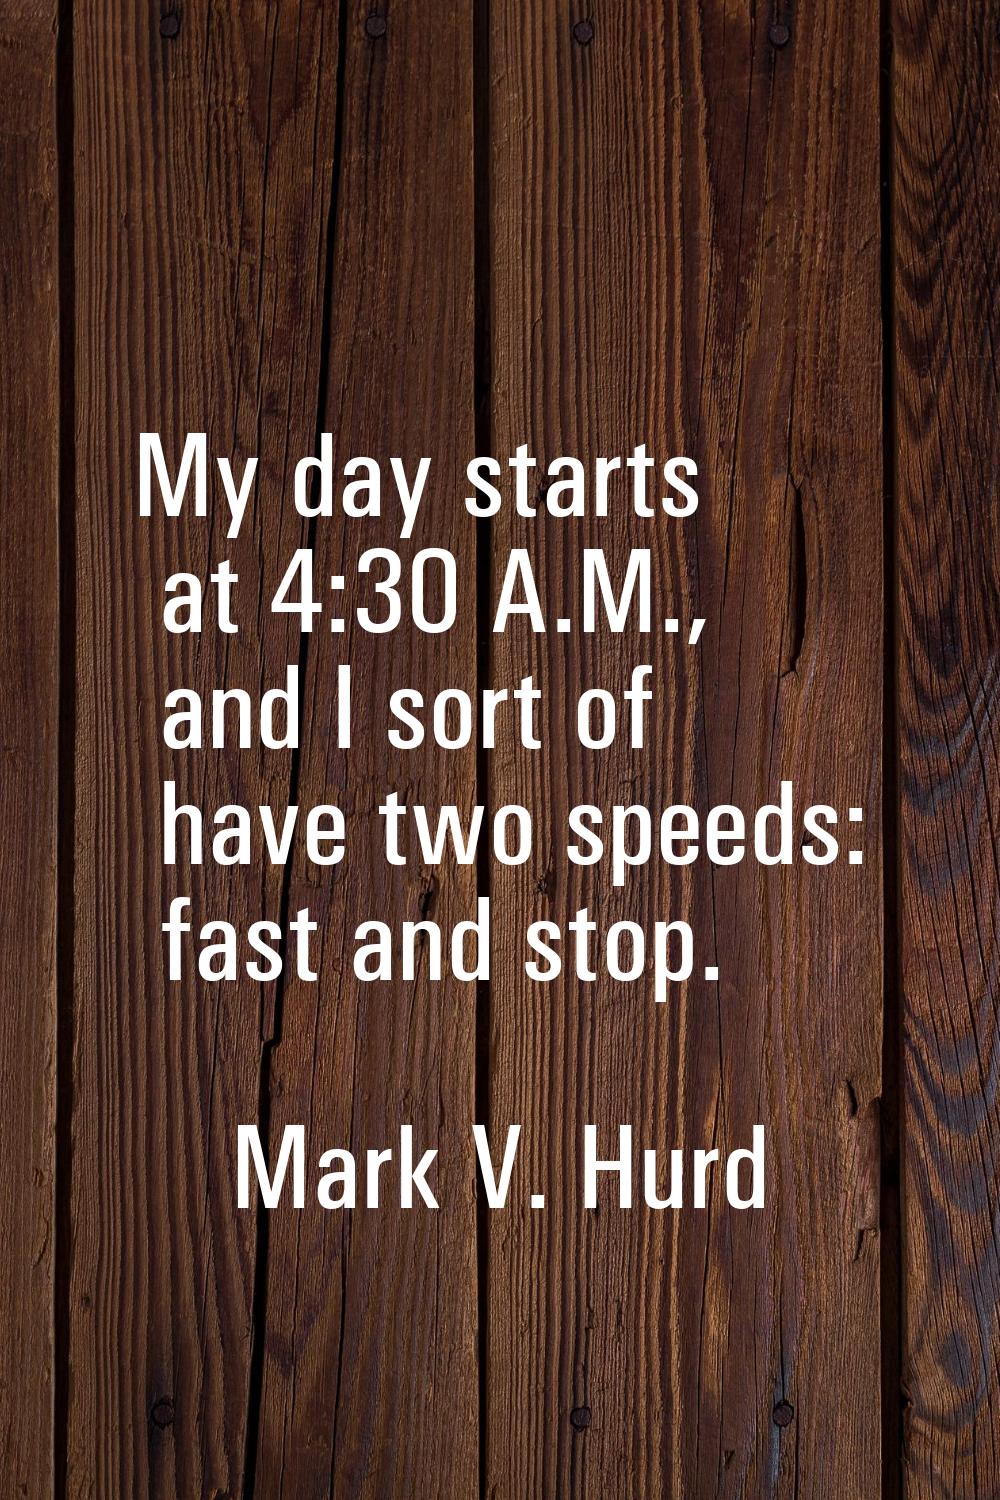 My day starts at 4:30 A.M., and I sort of have two speeds: fast and stop.